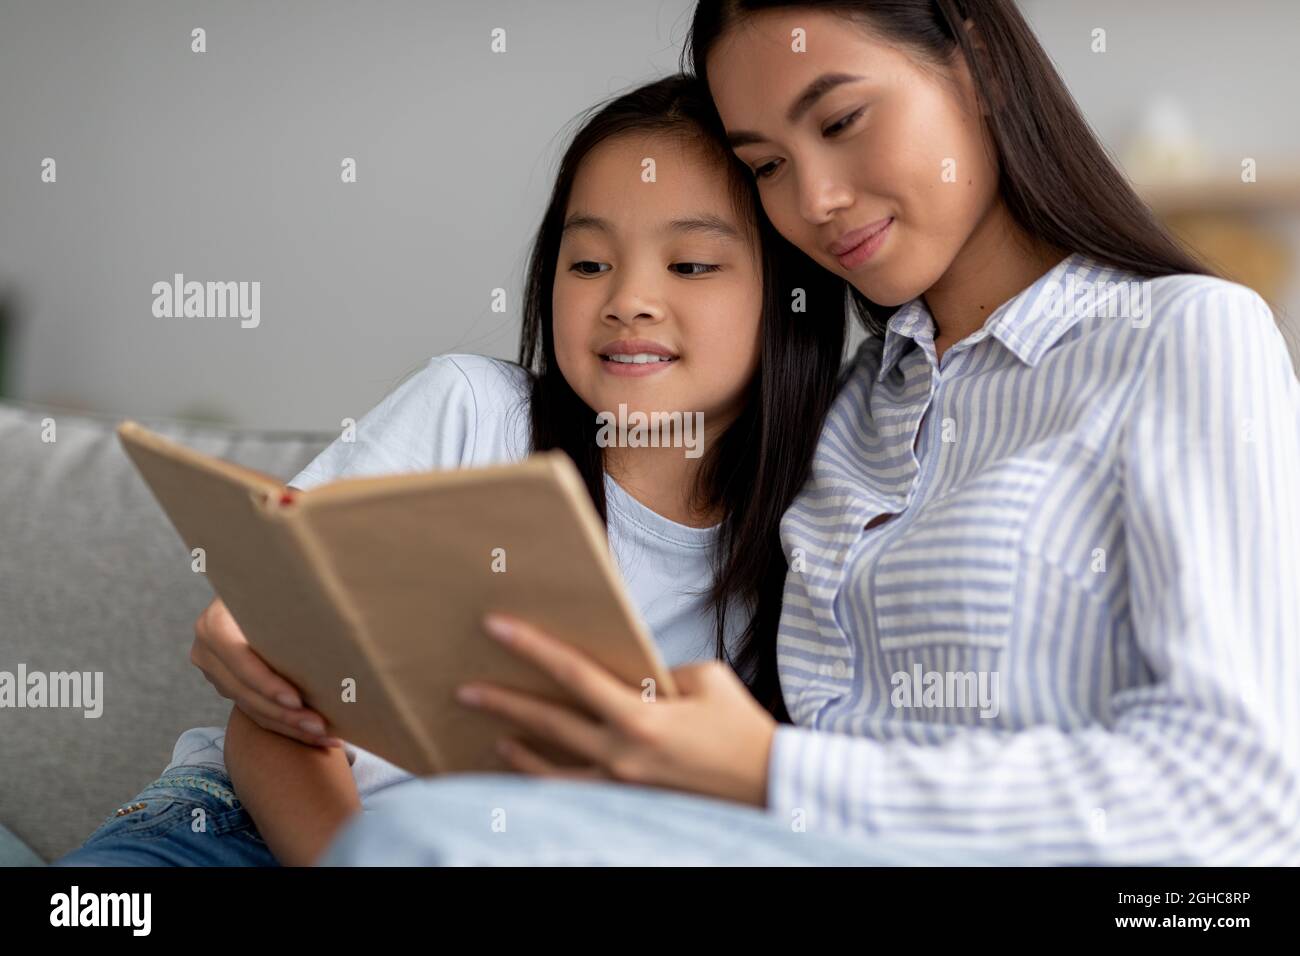 Happy asian girl reading book with her mother, sitting together on sofa and smiling, spending time at home interior Stock Photo